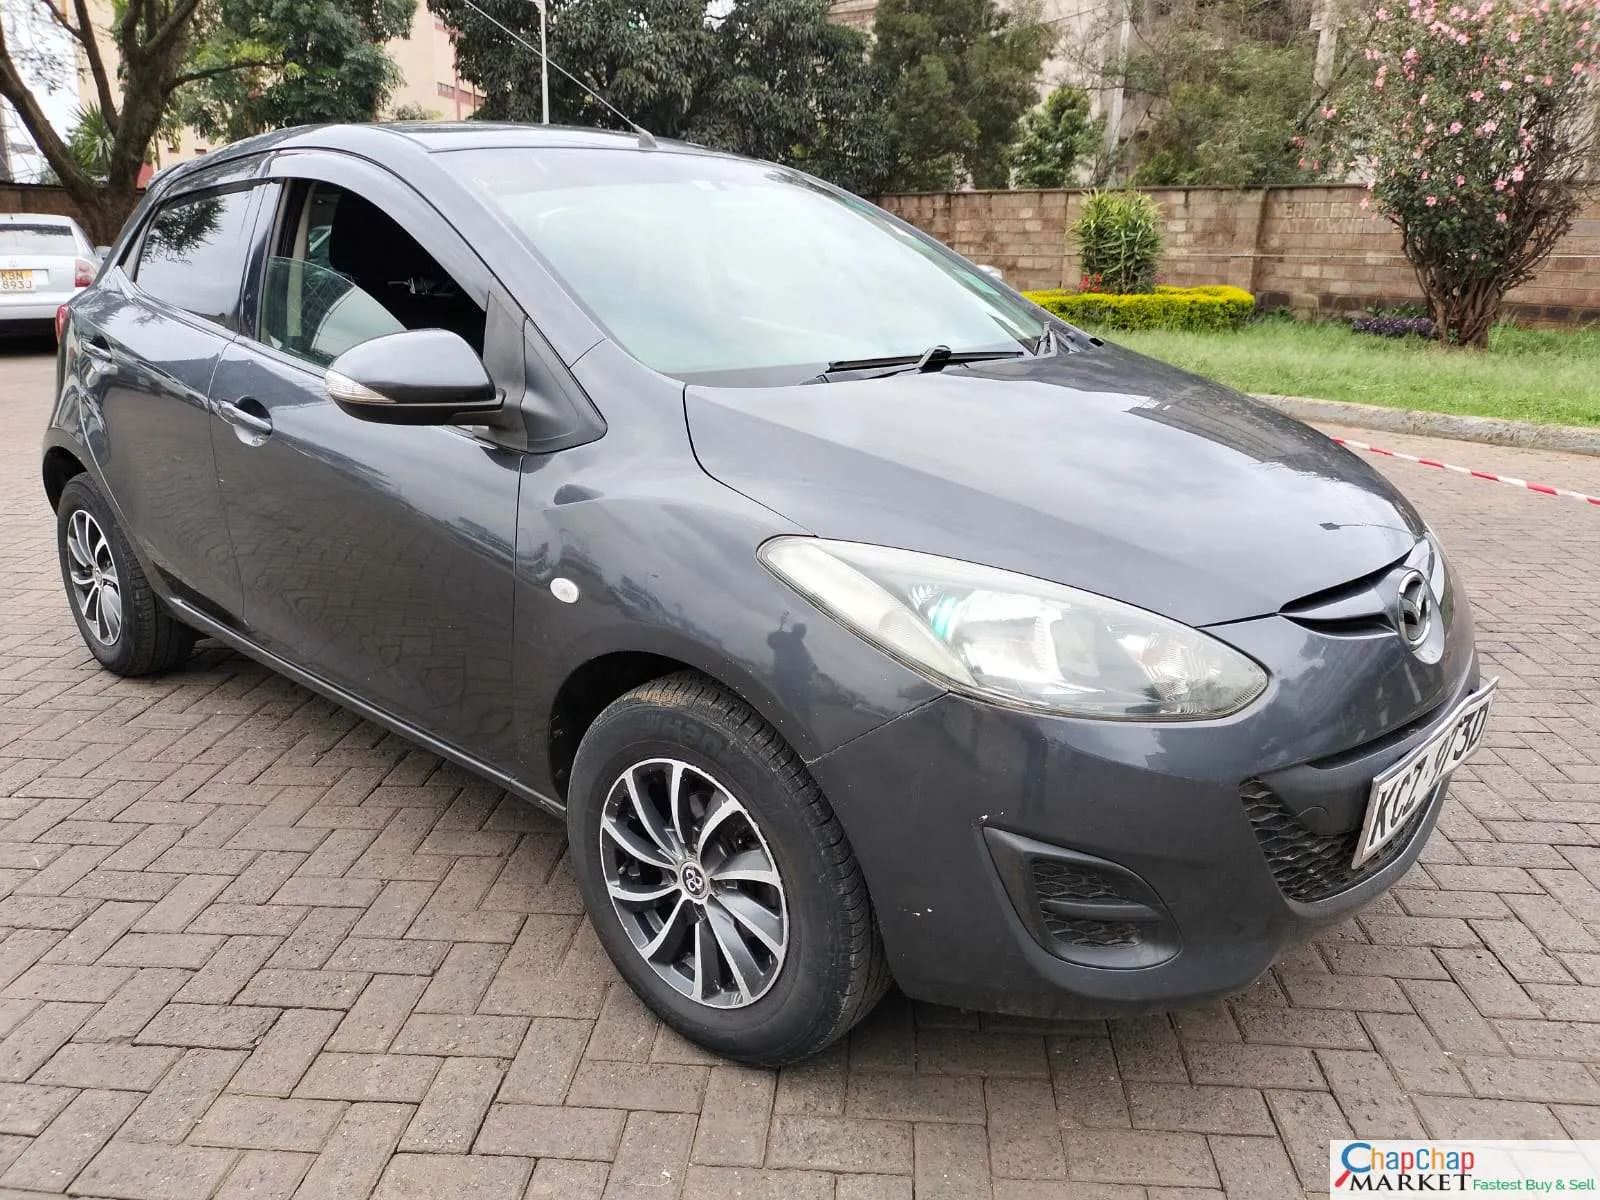 Mazda Demio kenya QUICK SALE You Pay 30% DEPOSIT demio for sale in kenya hire purchase installments TRADE IN OK EXCLUSIVE 🔥